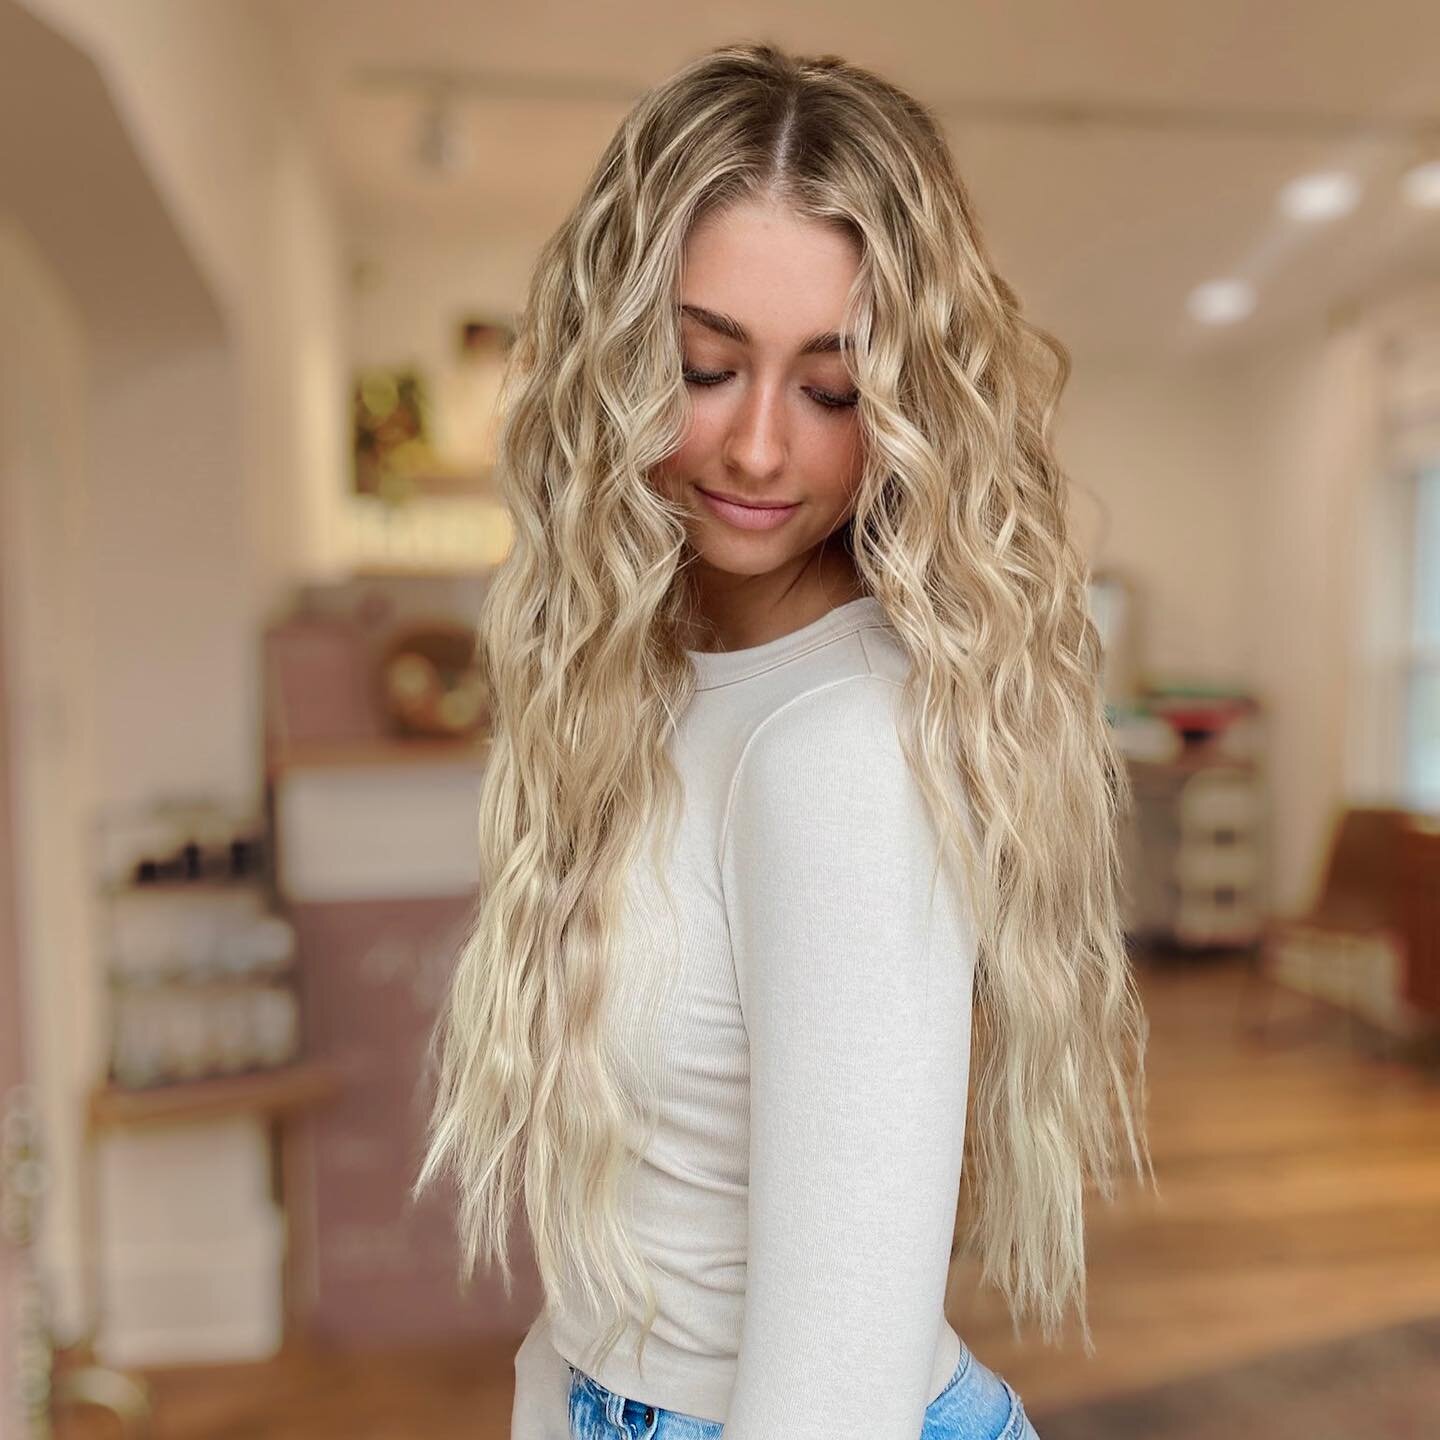 Your dream hair is waiting💭The power of a blonding  session + custom extensions with @hairxlauren 

Now til January lauren is taking extension models for an exclusive price! Don&rsquo;t miss the opportunity to get the dream hair you&rsquo;ve been wa